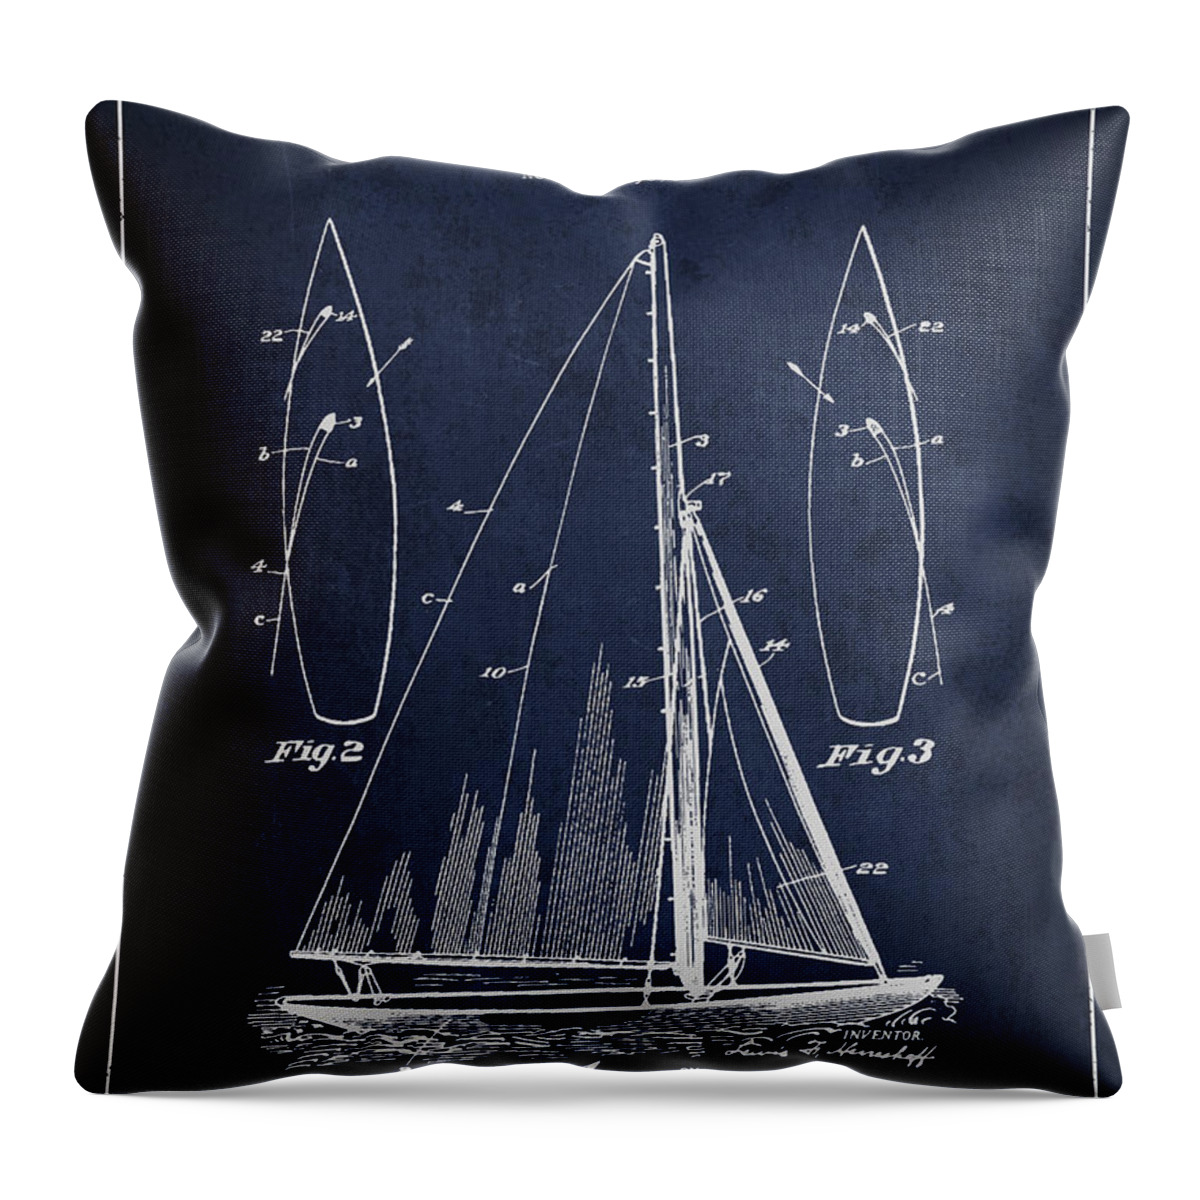 Sailboat Throw Pillow featuring the digital art Sailboat Patent Drawing From 1927 by Aged Pixel